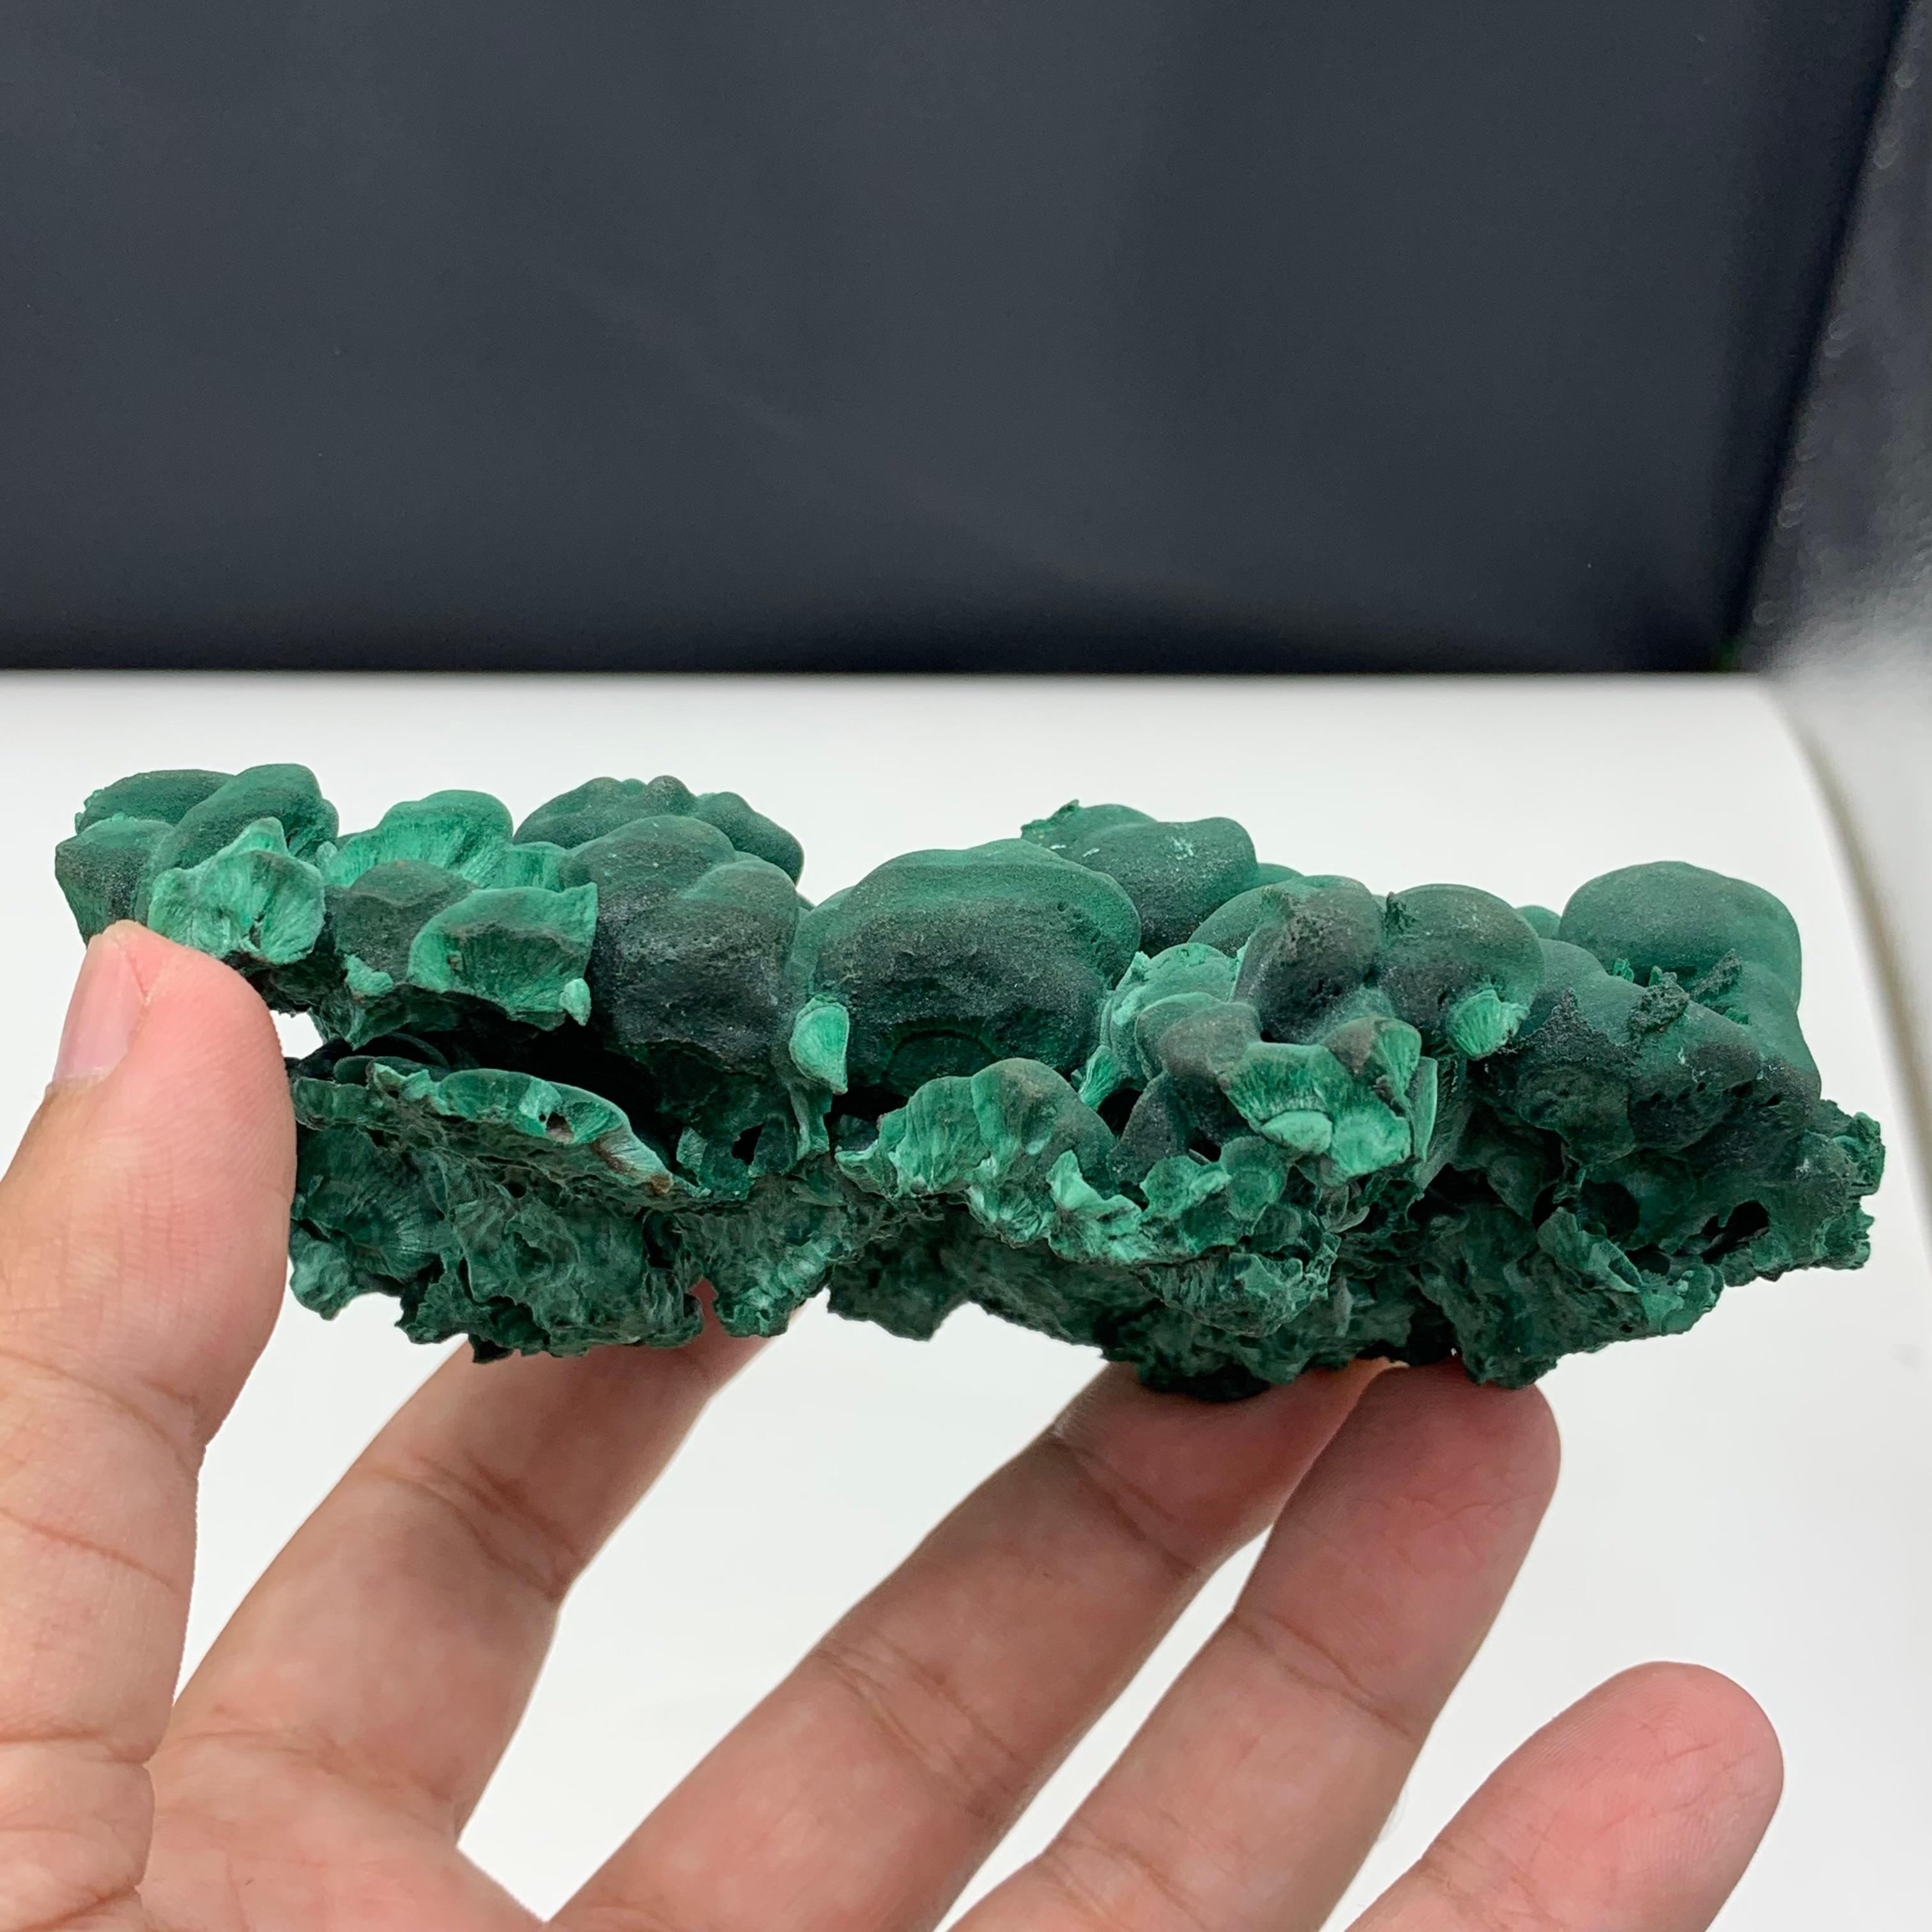 Rock Crystal 291 Gram Incredible Alien Eye Malachite Cluster Specimen From Guangdong, China  For Sale